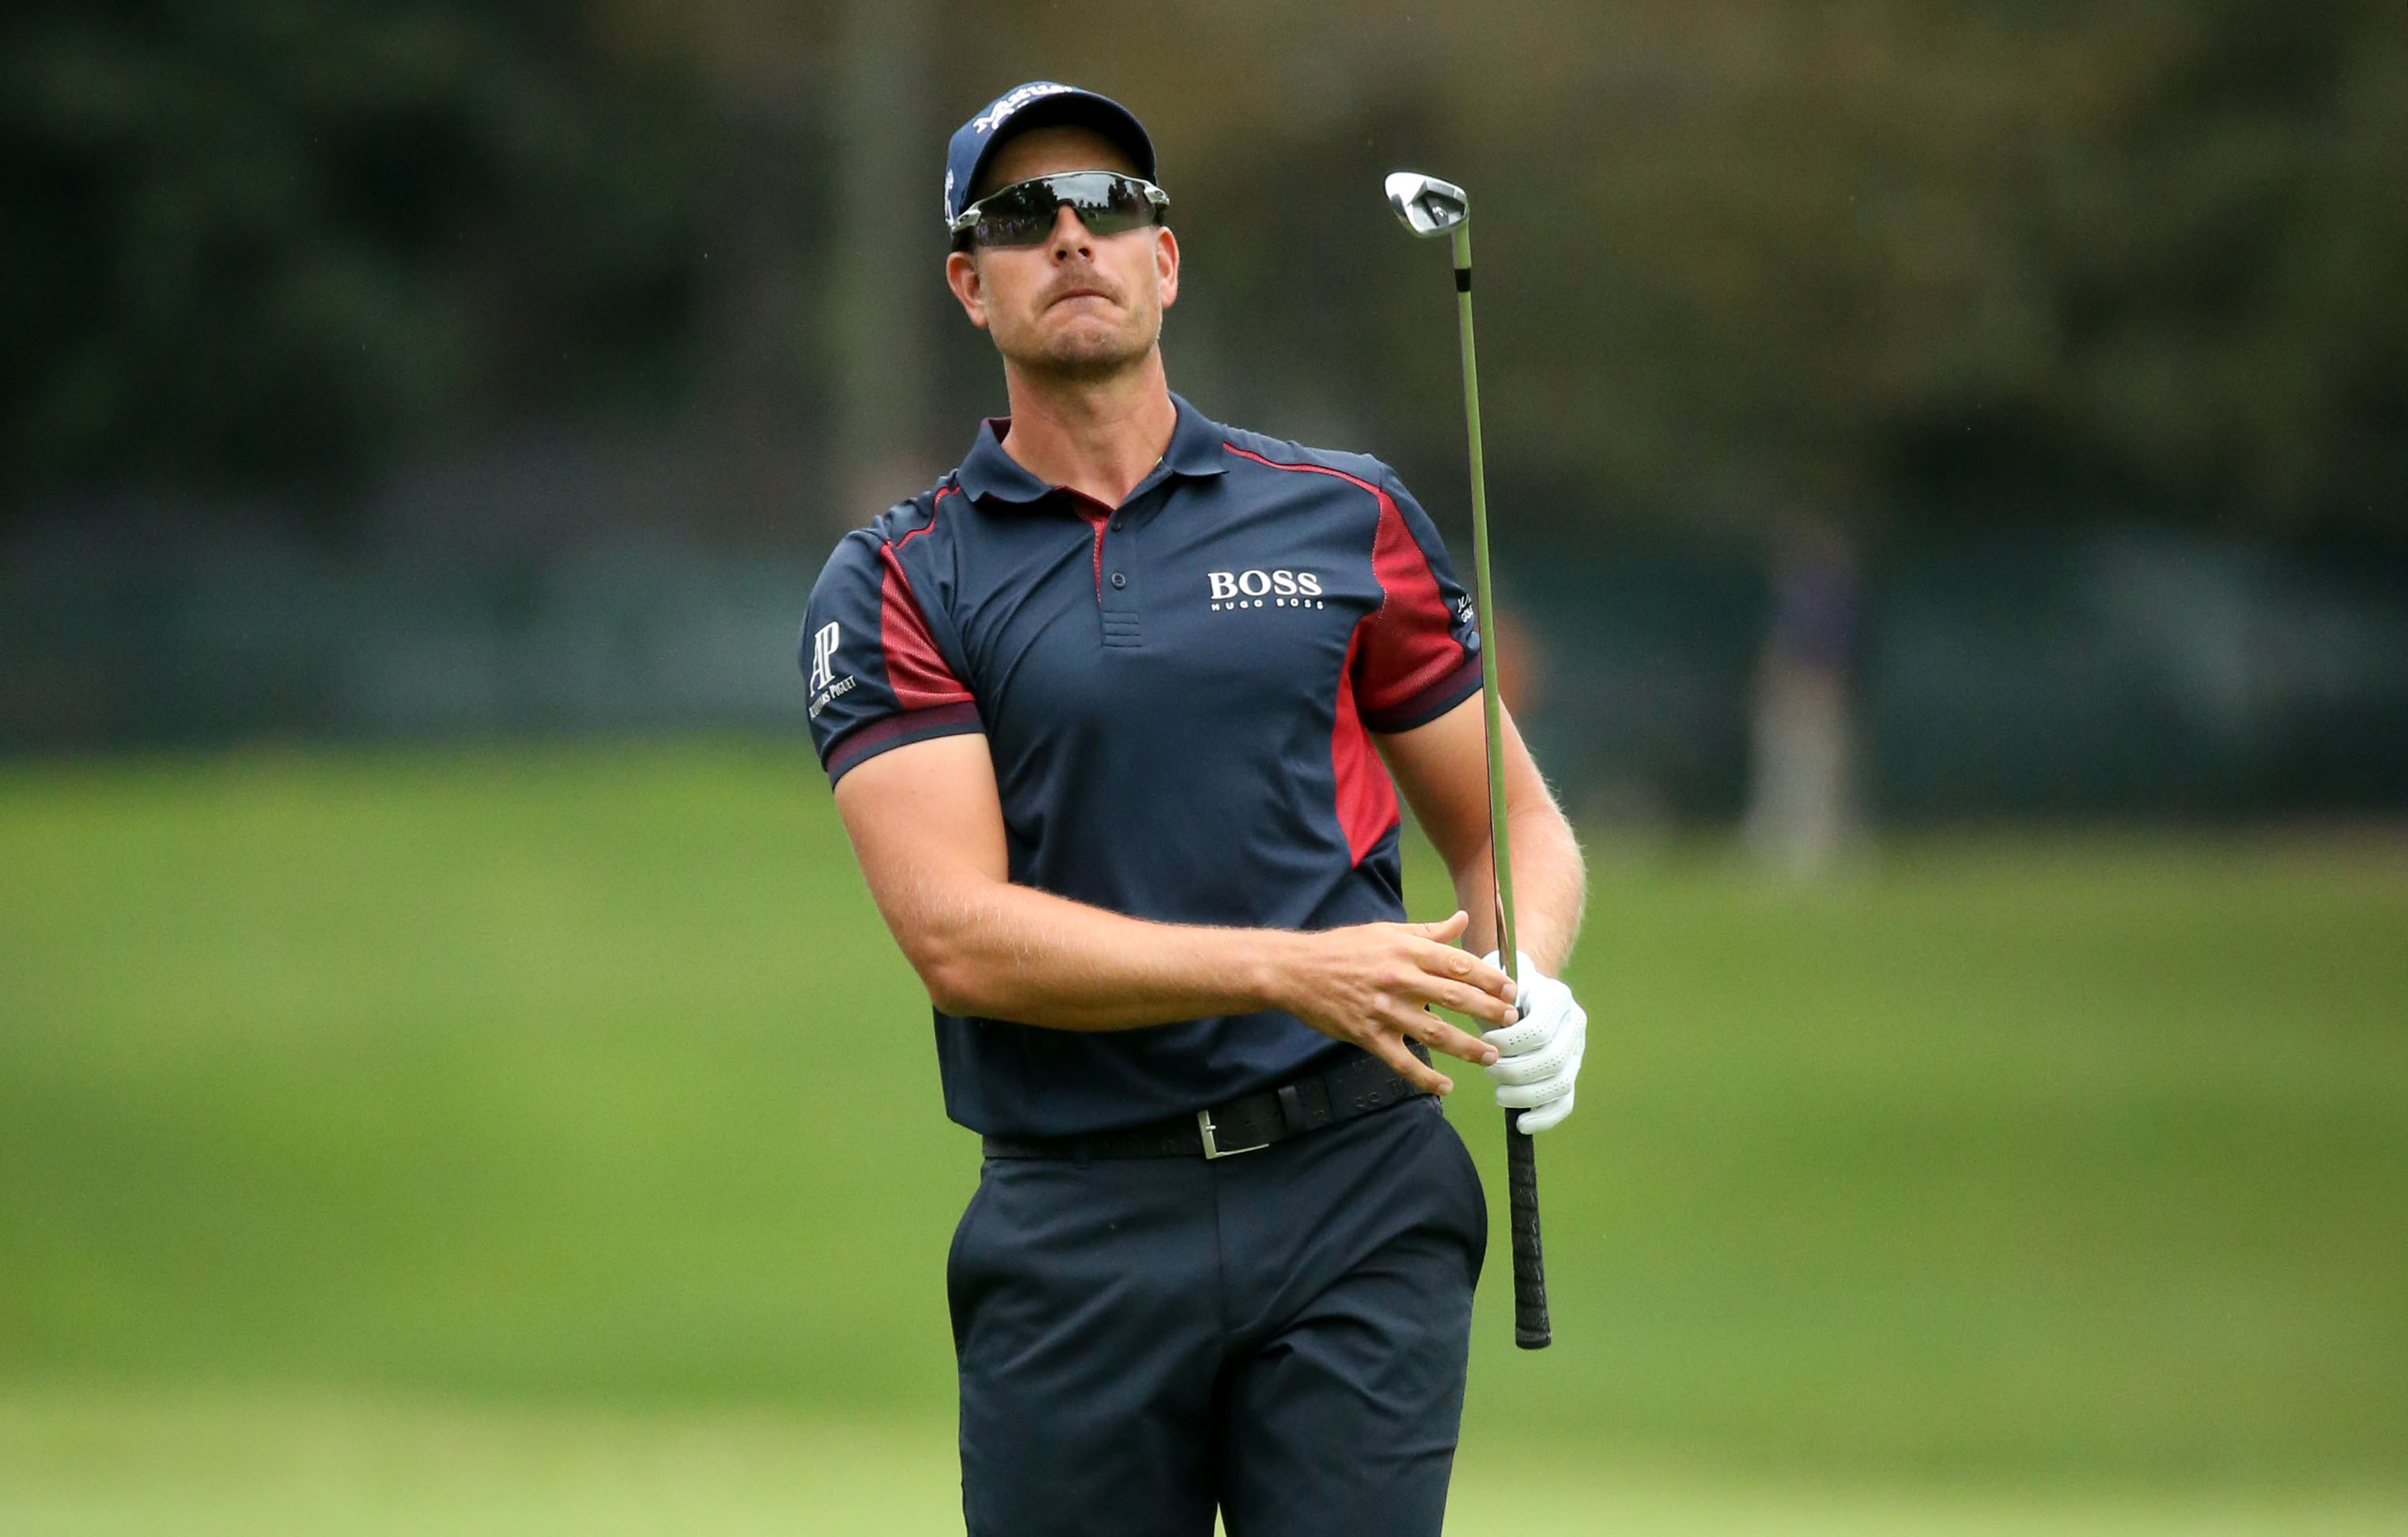 Sep 24, 2015; Atlanta, GA, USA; Henrik Stenson watches his shot from the fourteenth fairway during the first round of the Tour Championship by Coca-Cola at East Lake Golf Club. Mandatory Credit: Jason Getz-USA TODAY Sports